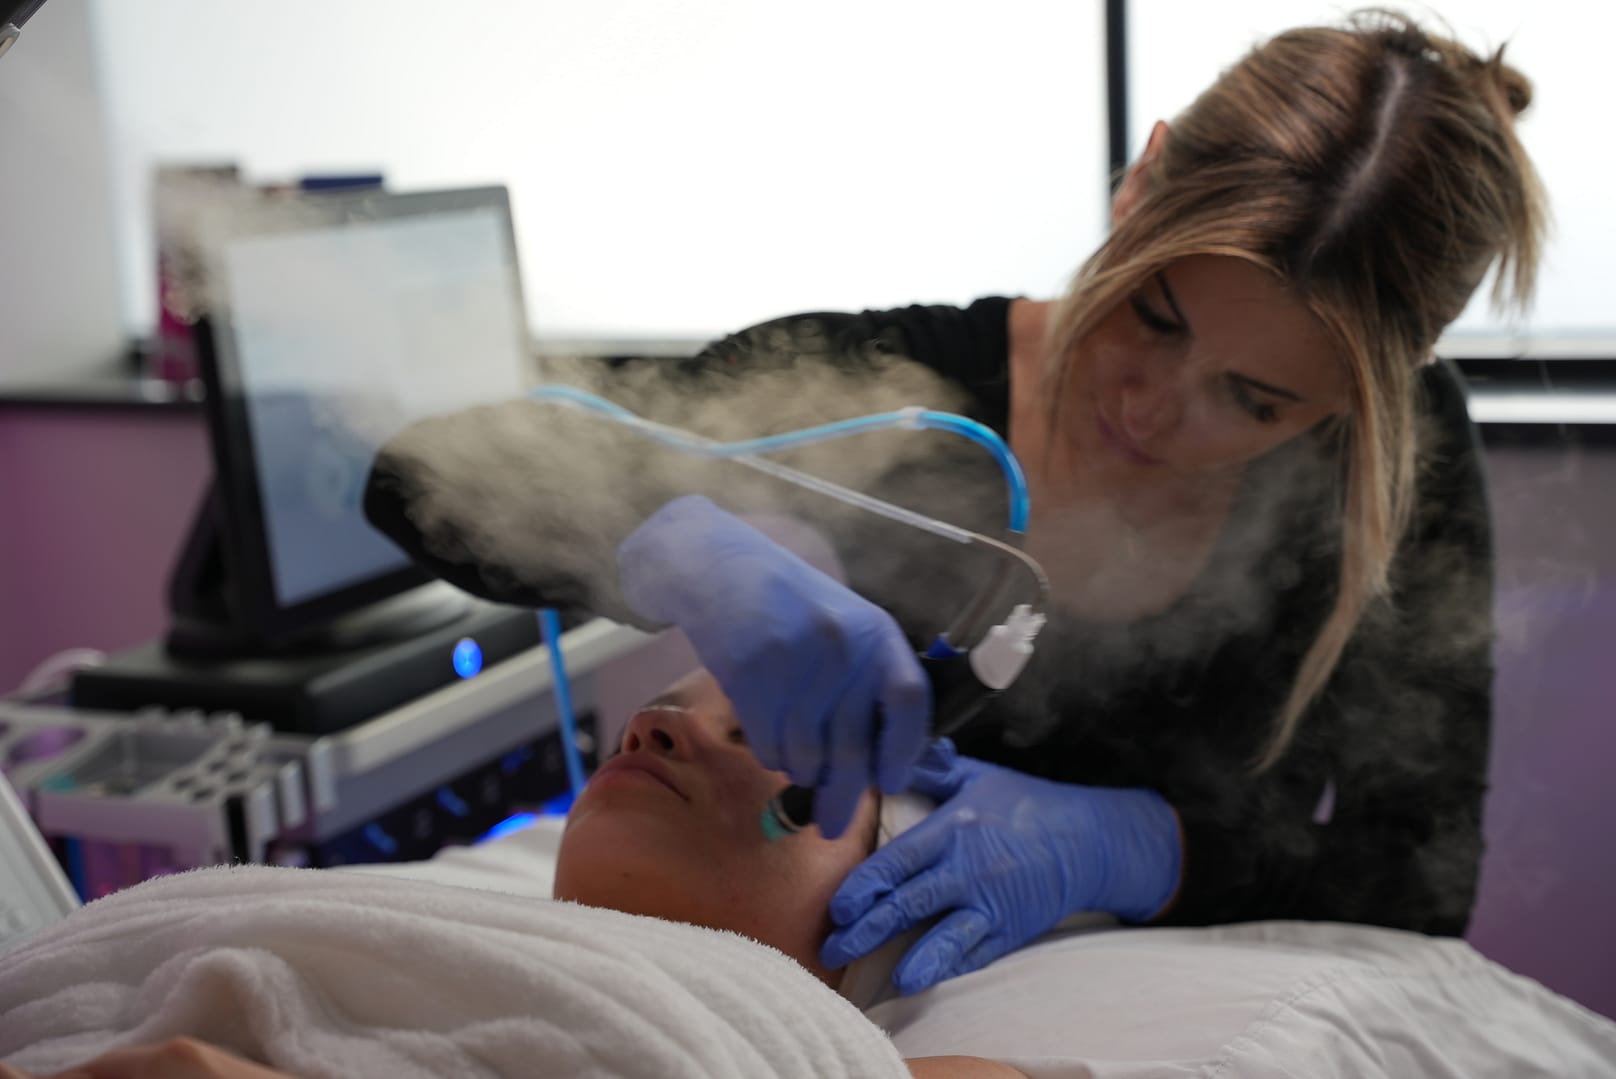 An image of Hydrafacial treatment executed by a female esthetician at Bloom Health.